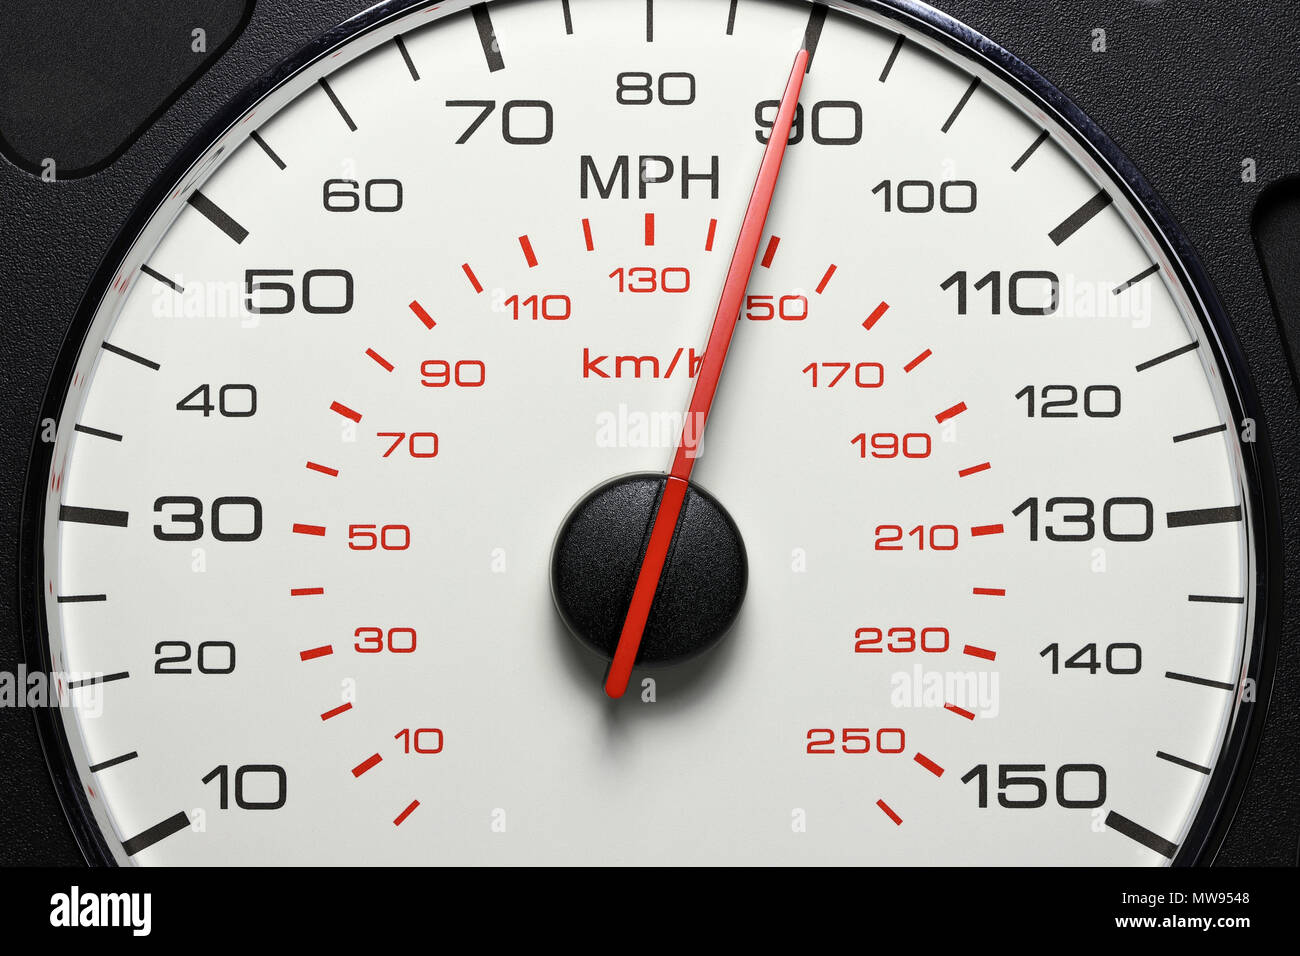 90 mph to.kmh